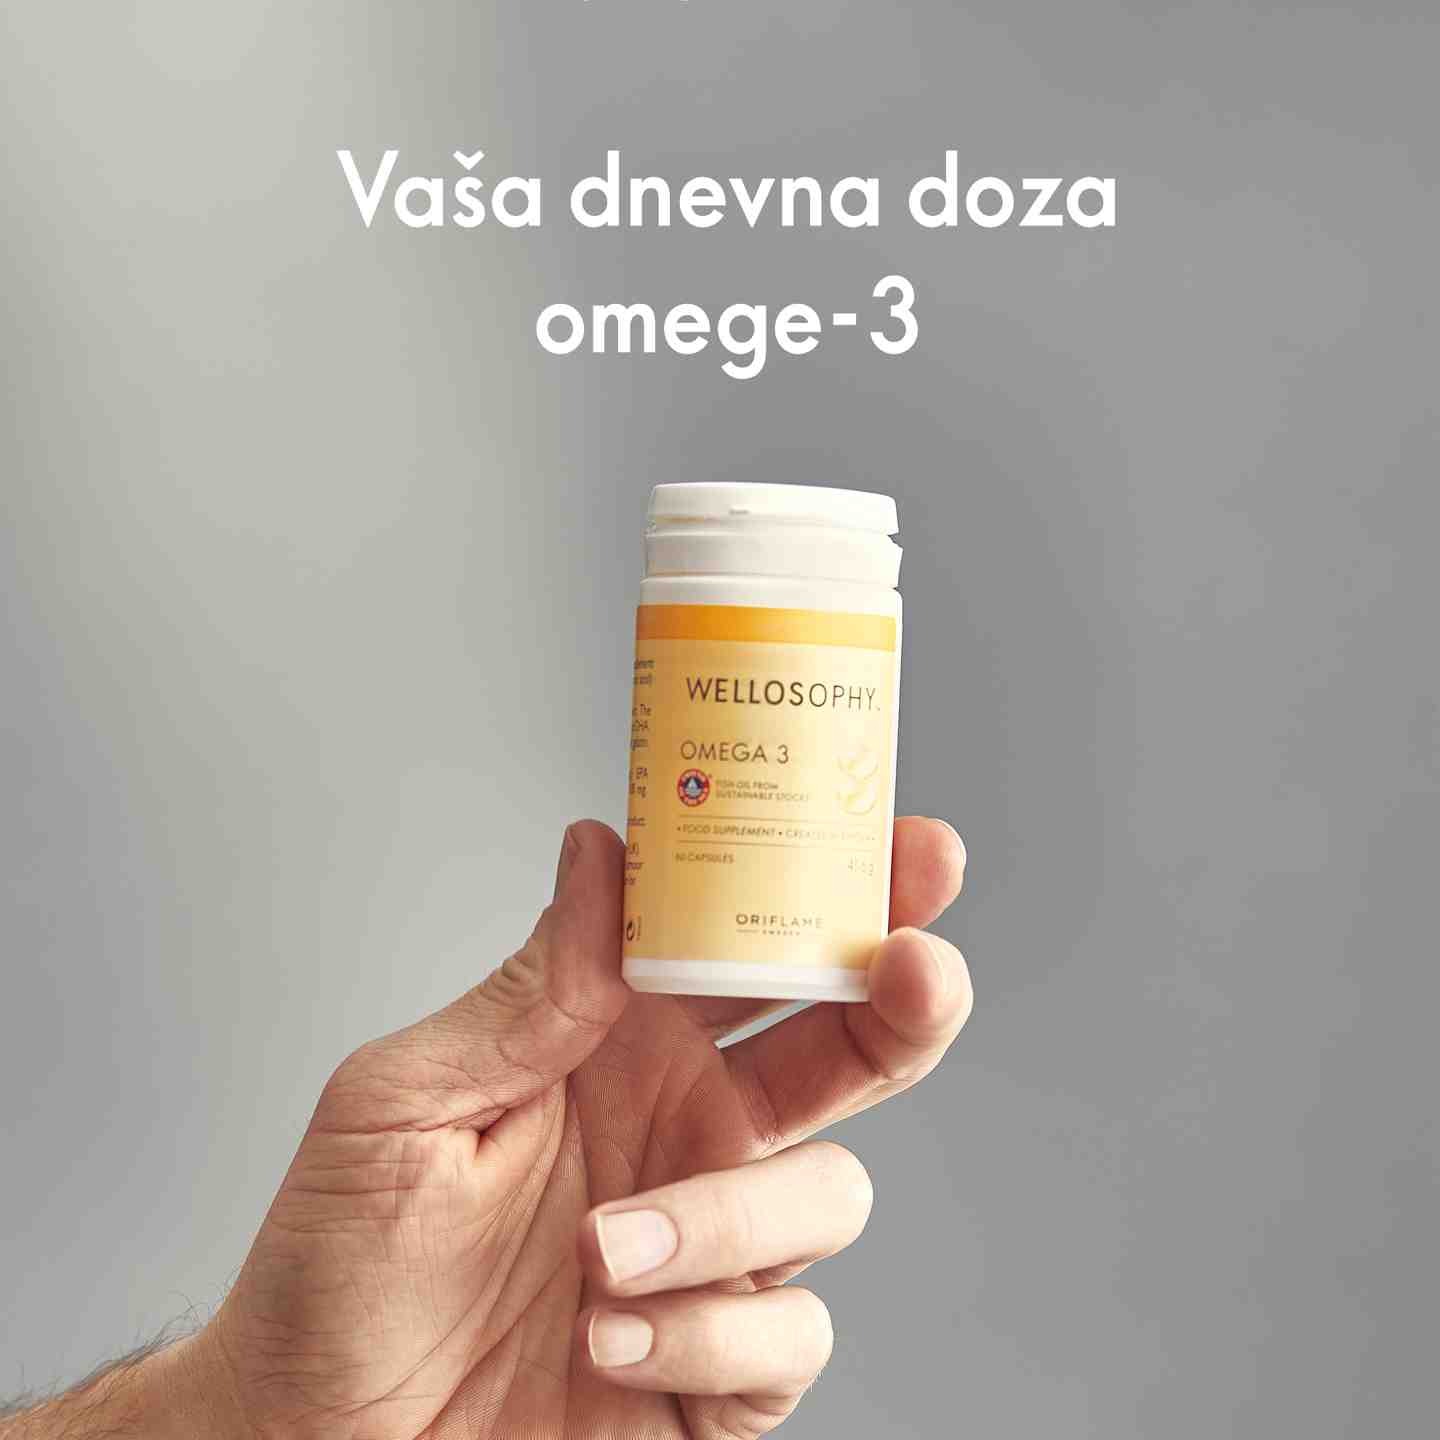 https://media-cdn.oriflame.com/productImage?externalMediaId=product-management-media%2fProducts%2f38556%2fME%2f38556_3.png&id=18293575&version=1